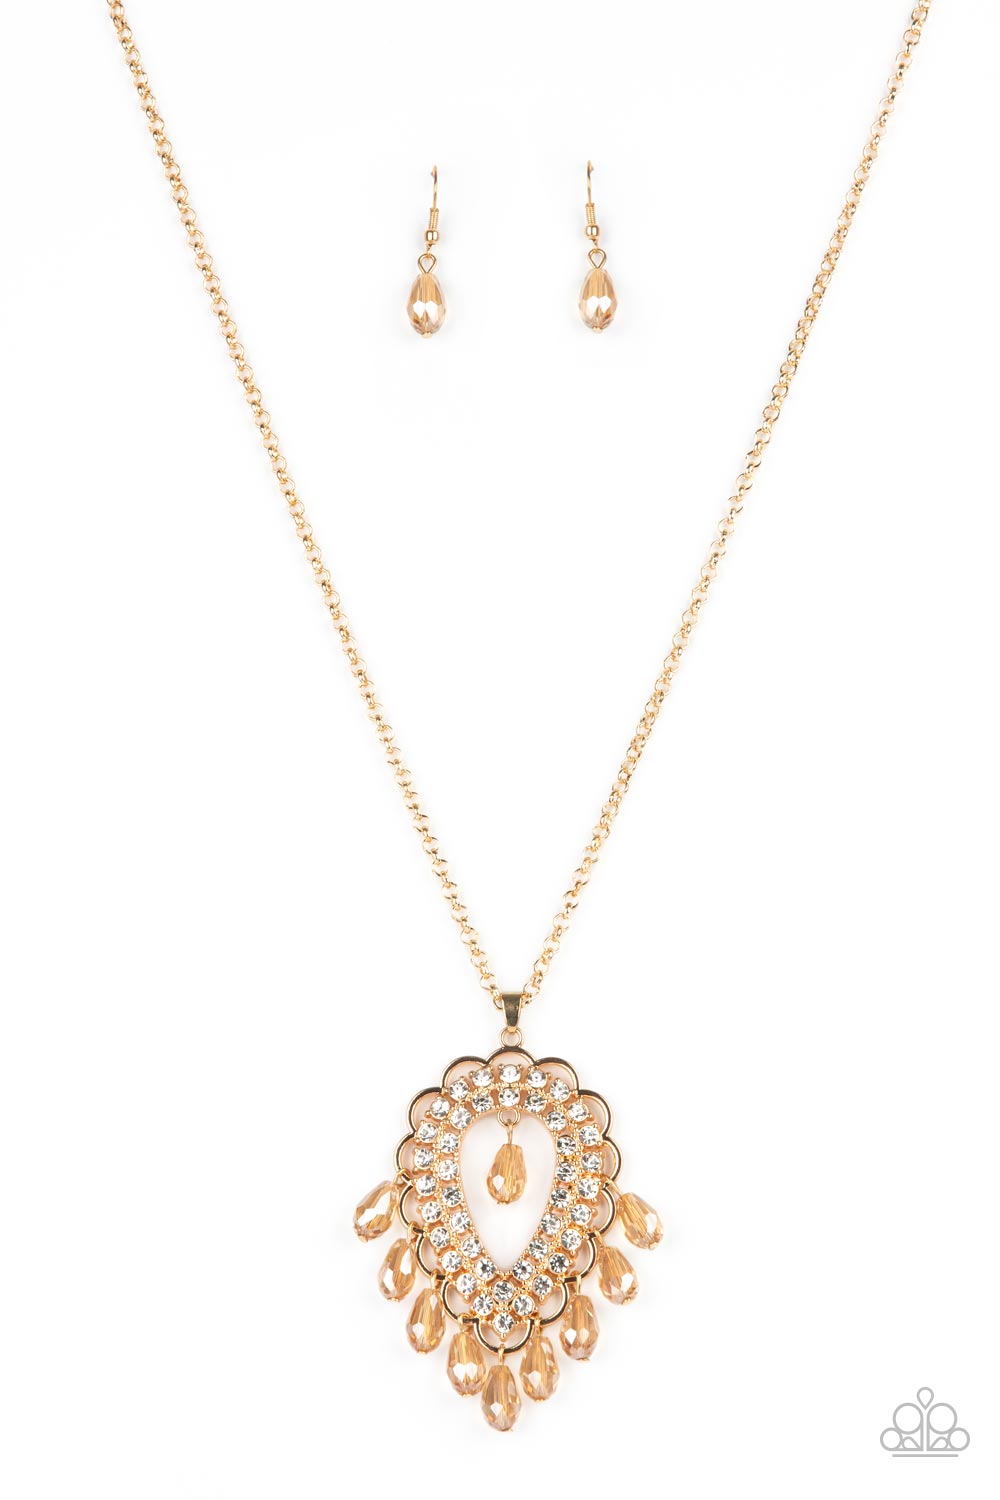 Teasable Teardrops Gold-Necklace